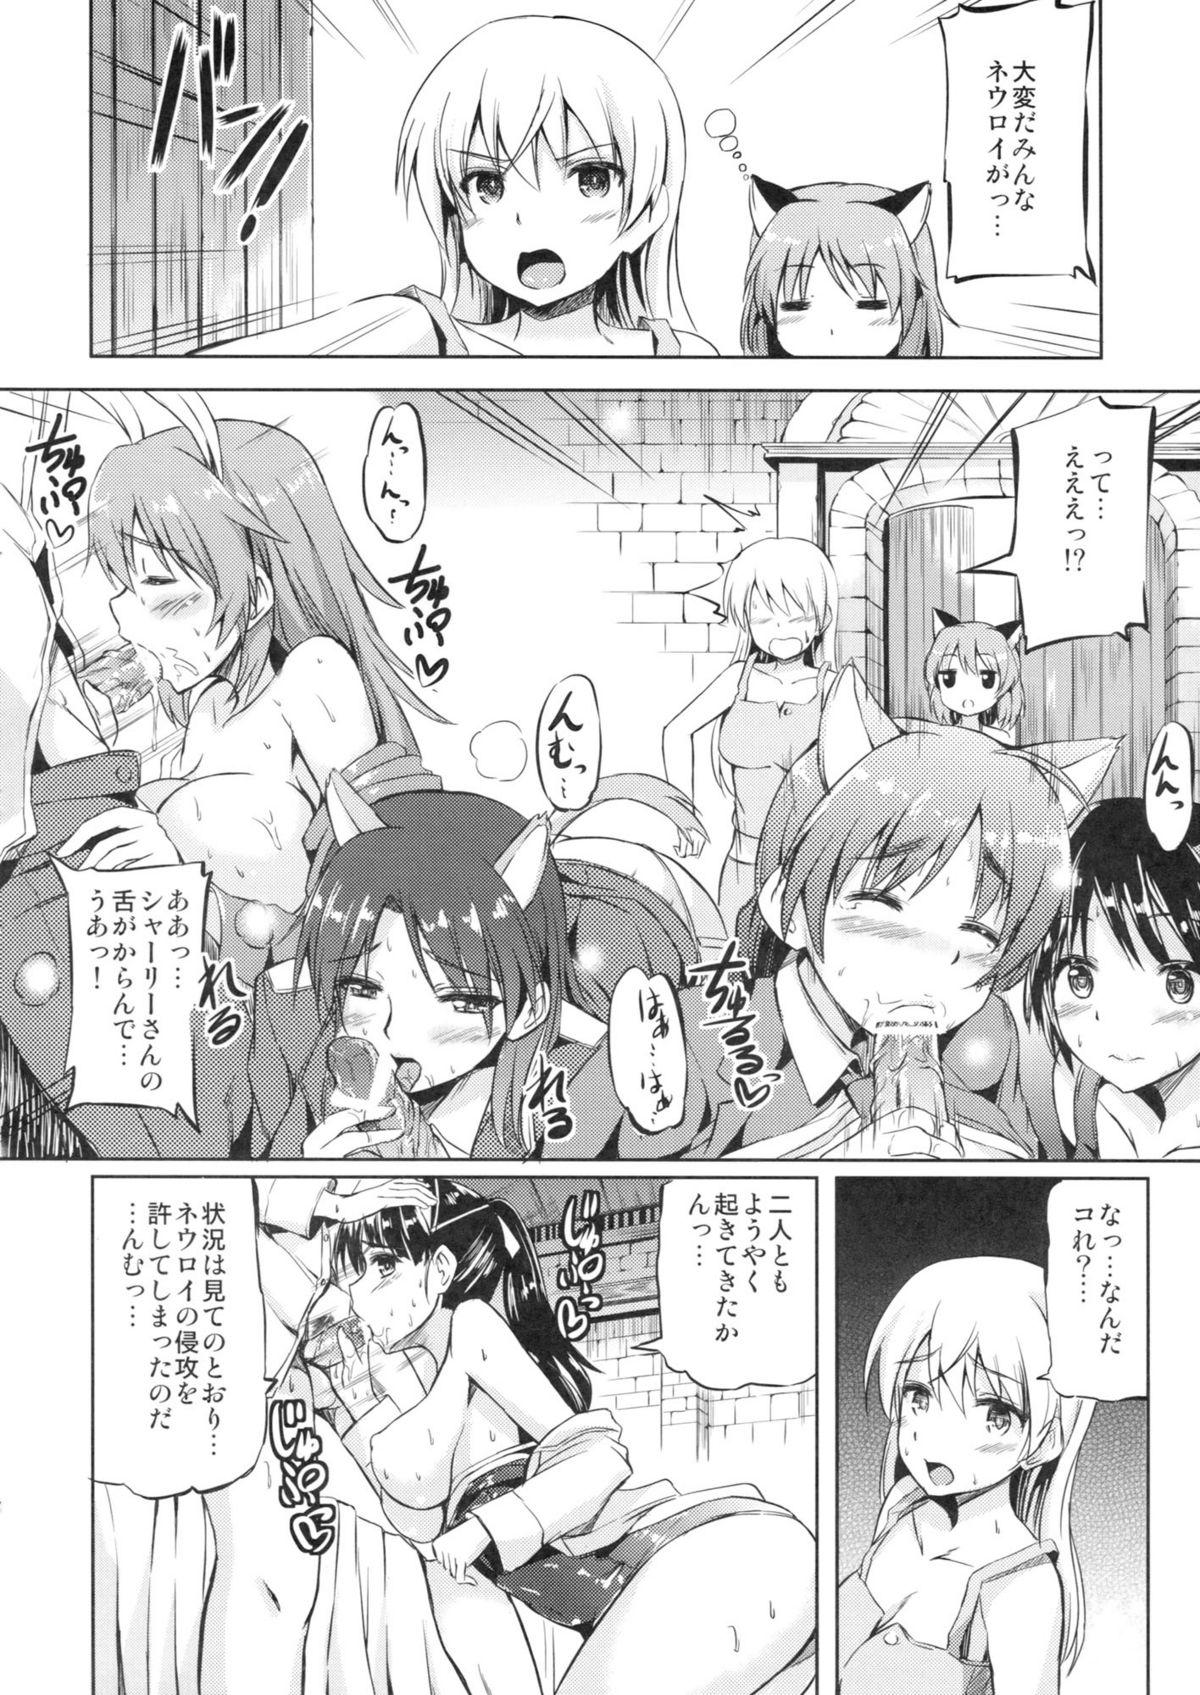 Gaygroupsex Delicious Witches! - Strike witches Class - Page 4